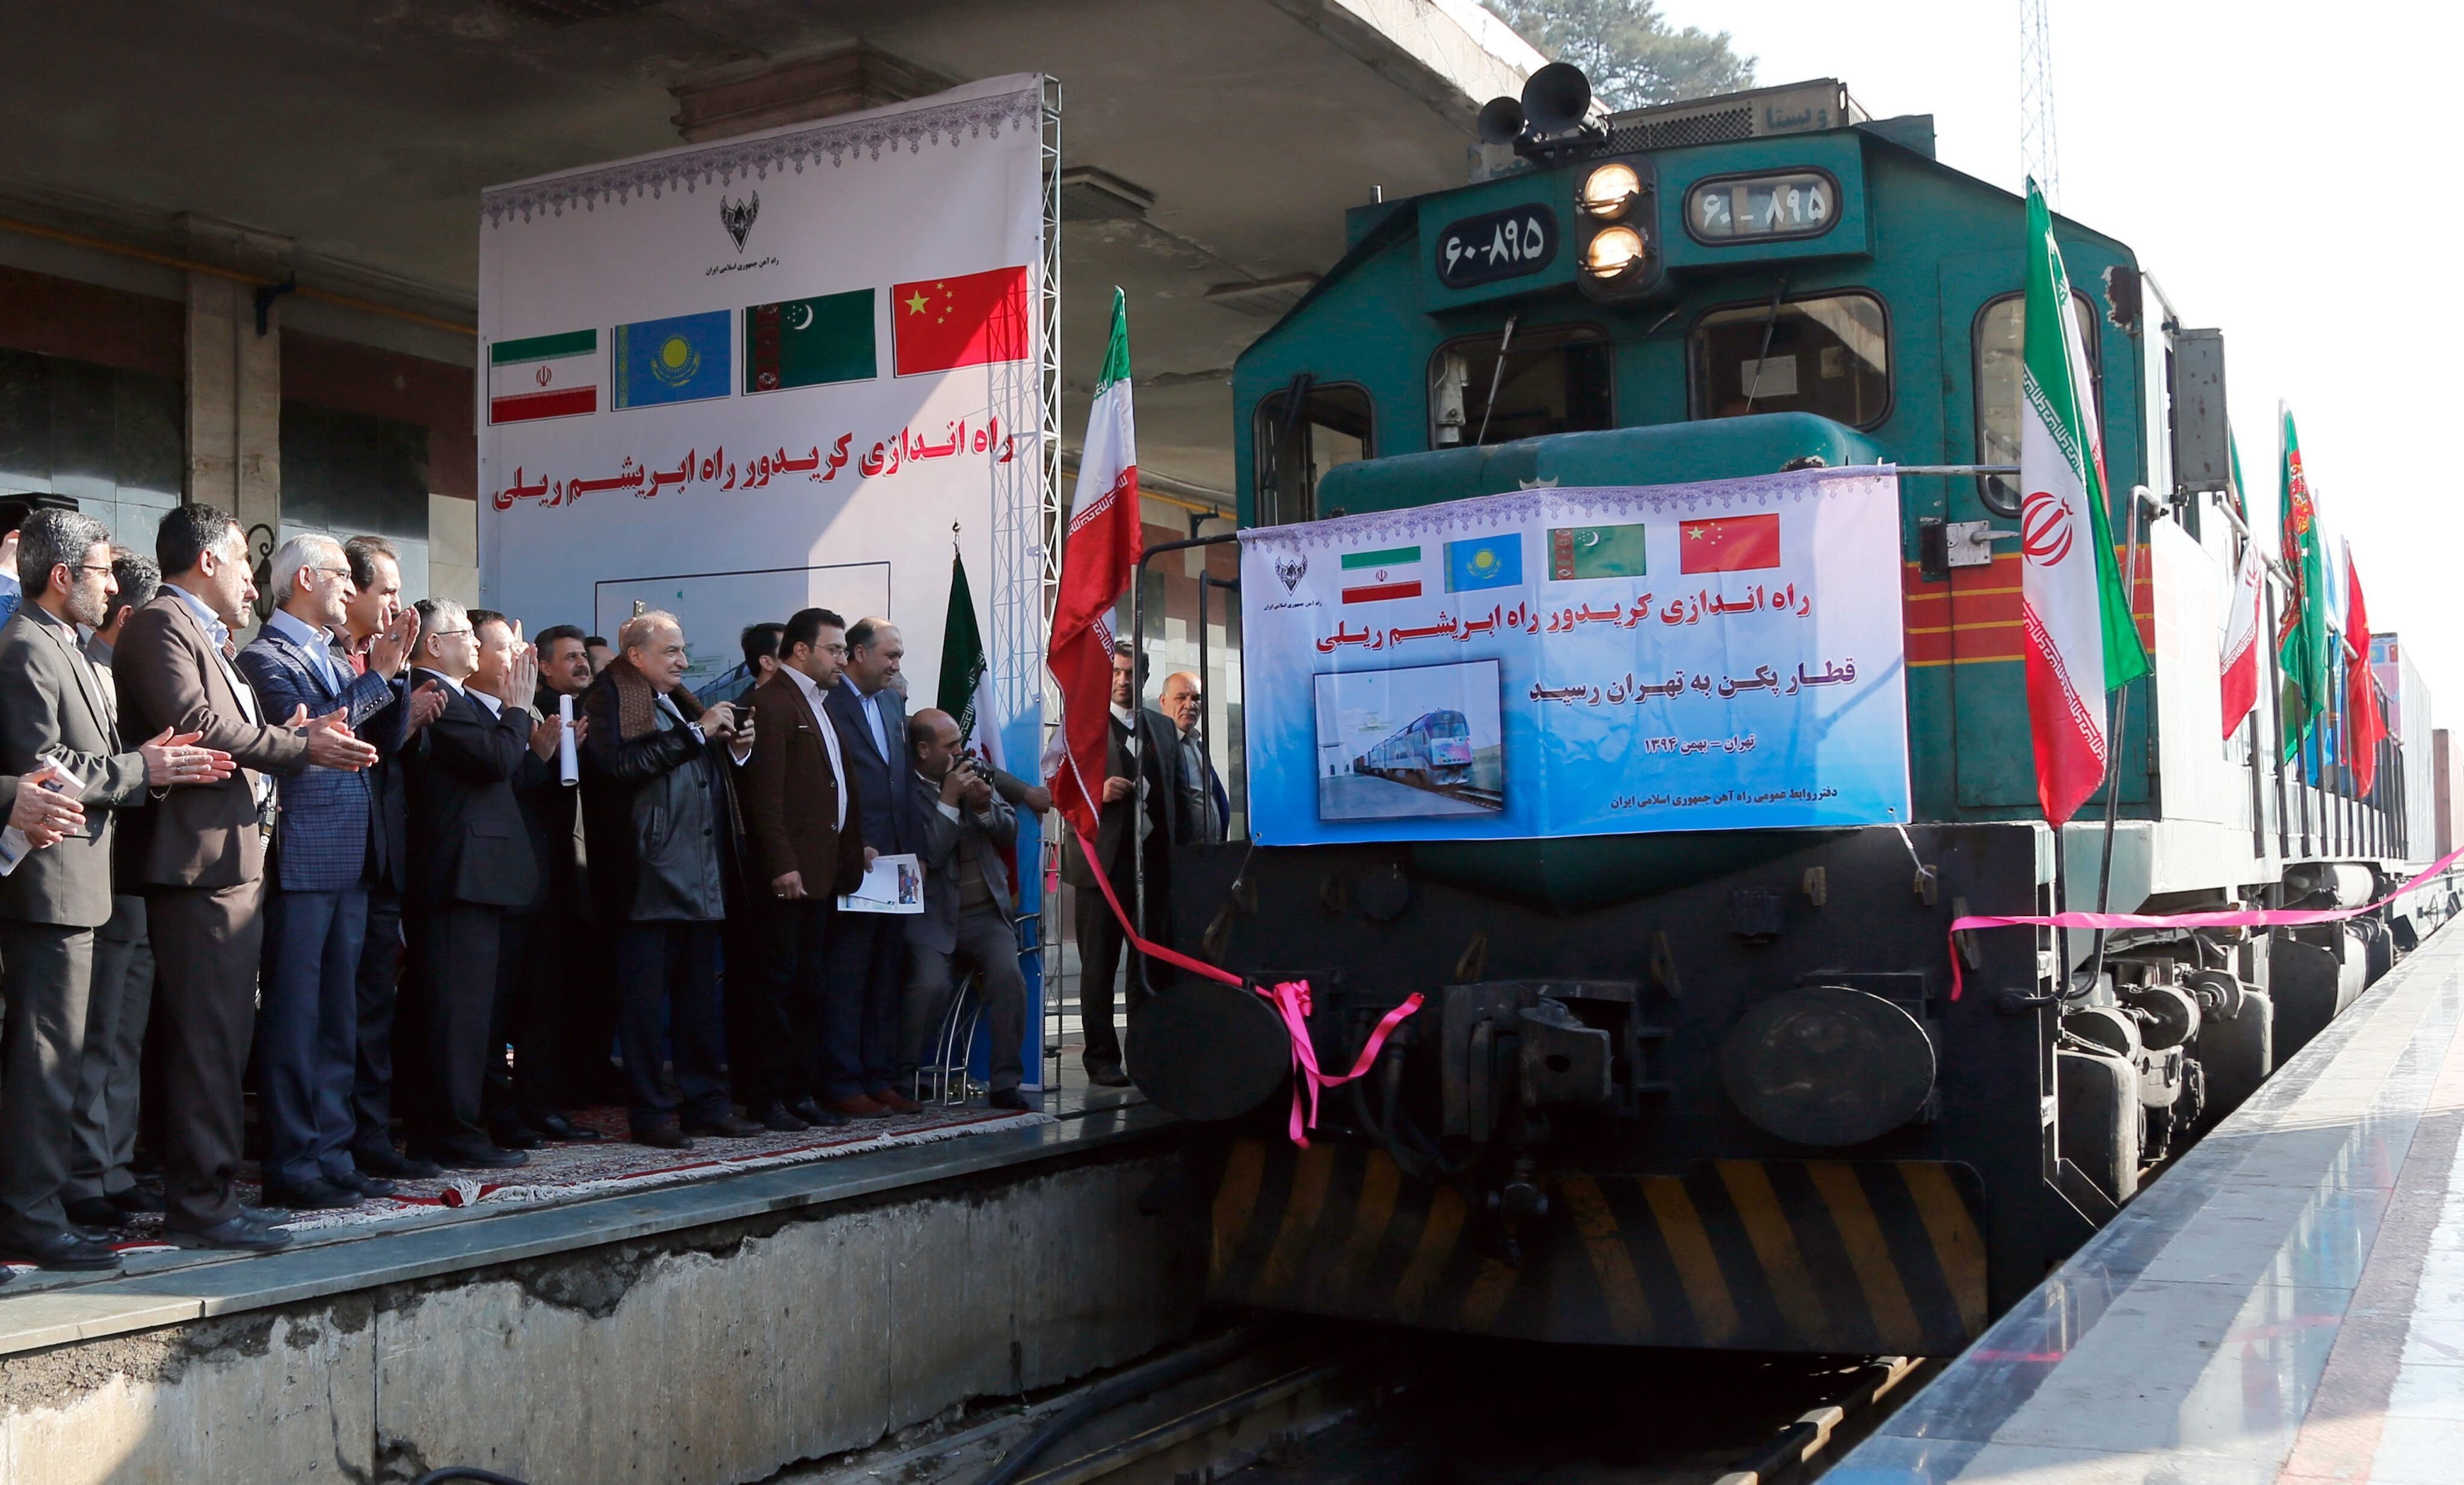 A Chinese goods train arrives in the Iranian capital Tehran on February 15, 2016, as part of China’s Belt and Road Initiative. A planned Istanbul-Tehran-Islamabad train route will also fit into Chinese President Xi Jinping’s signature trade and infrastructure plan. Photo: EPA